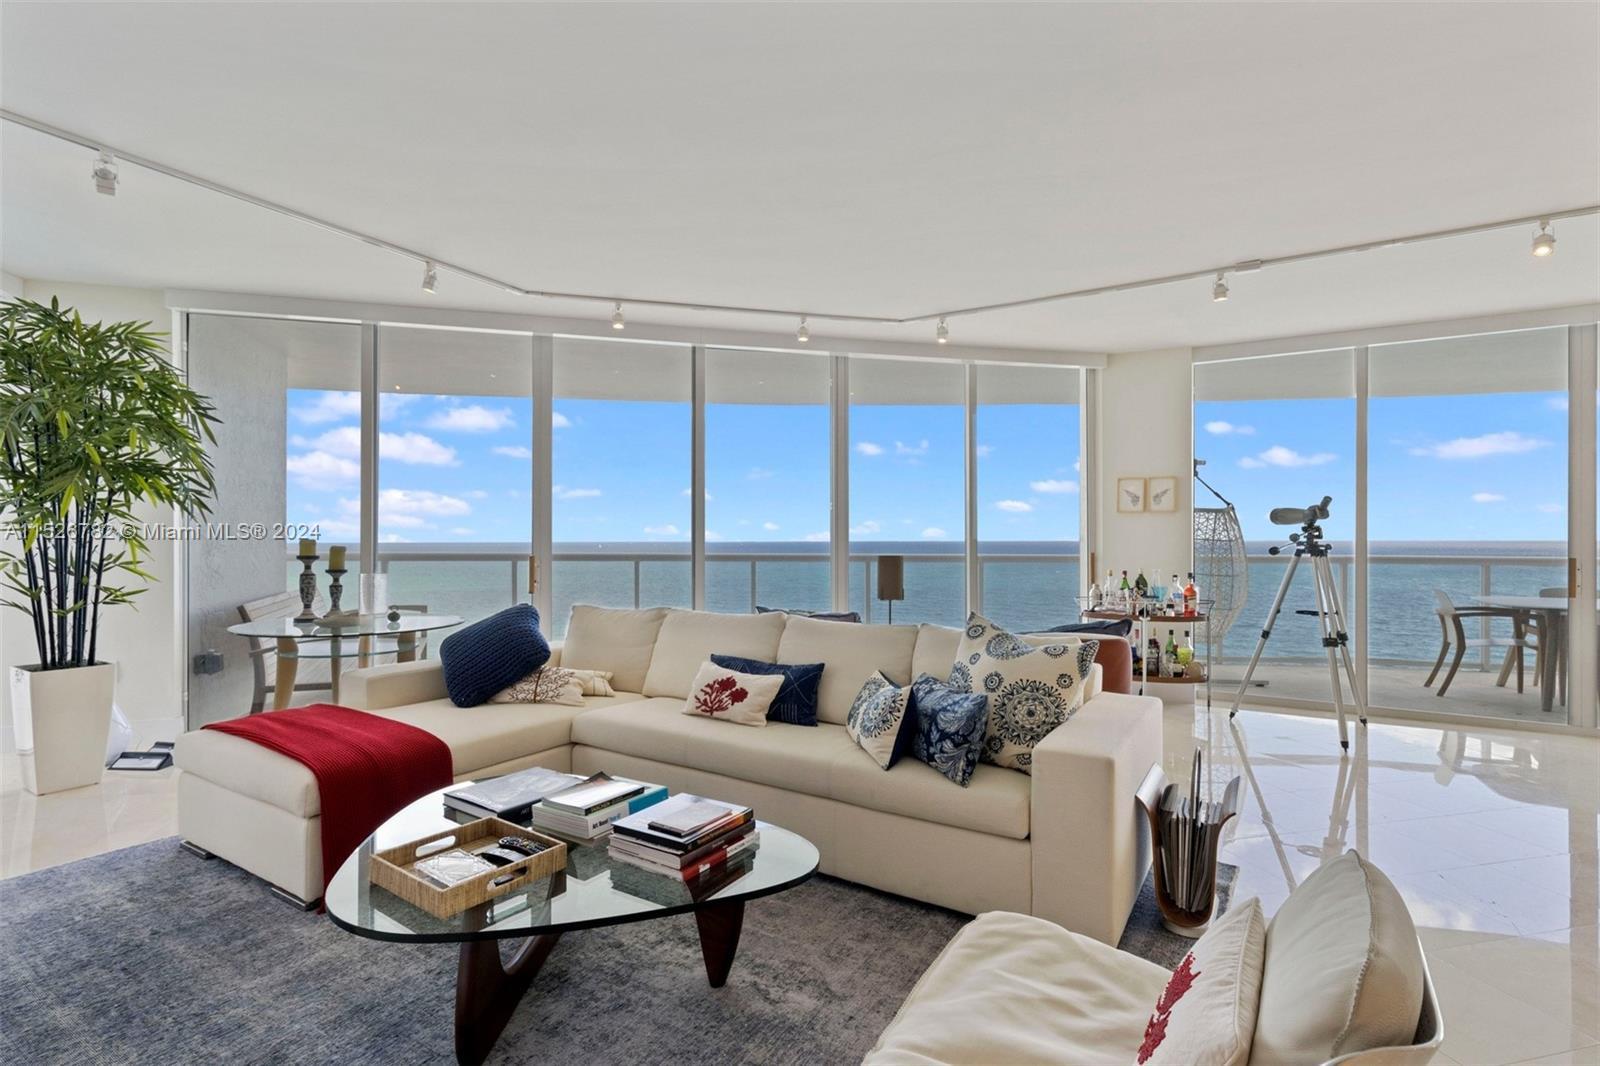 Spectacular remodeled 3 beds + den, 3.5 baths unit with panoramic views of the ocean and intracoasta